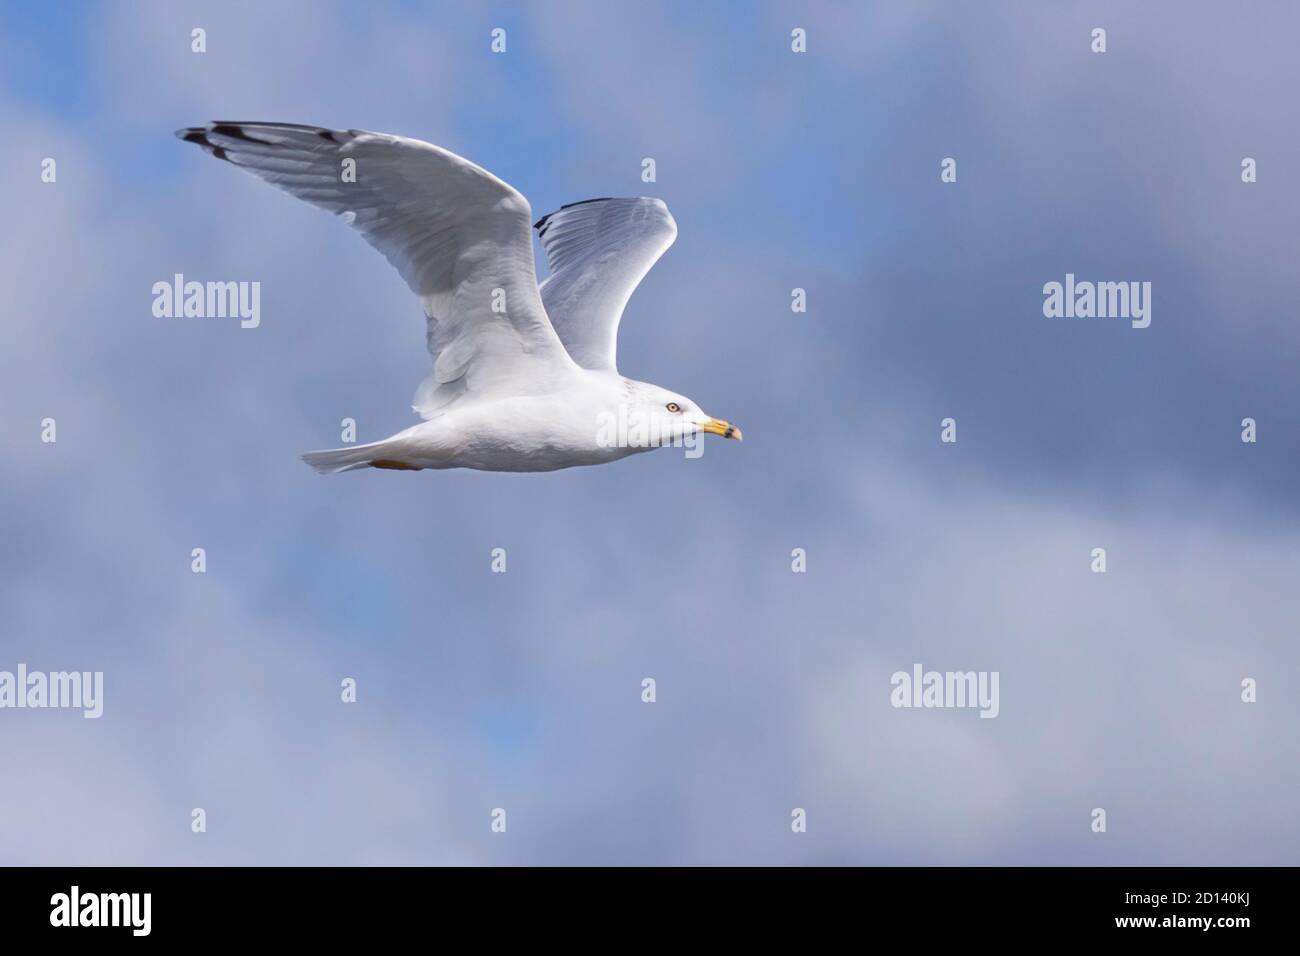 Like a missle soaring across the sky, a ring-billed gull glides through the heavens. Stock Photo